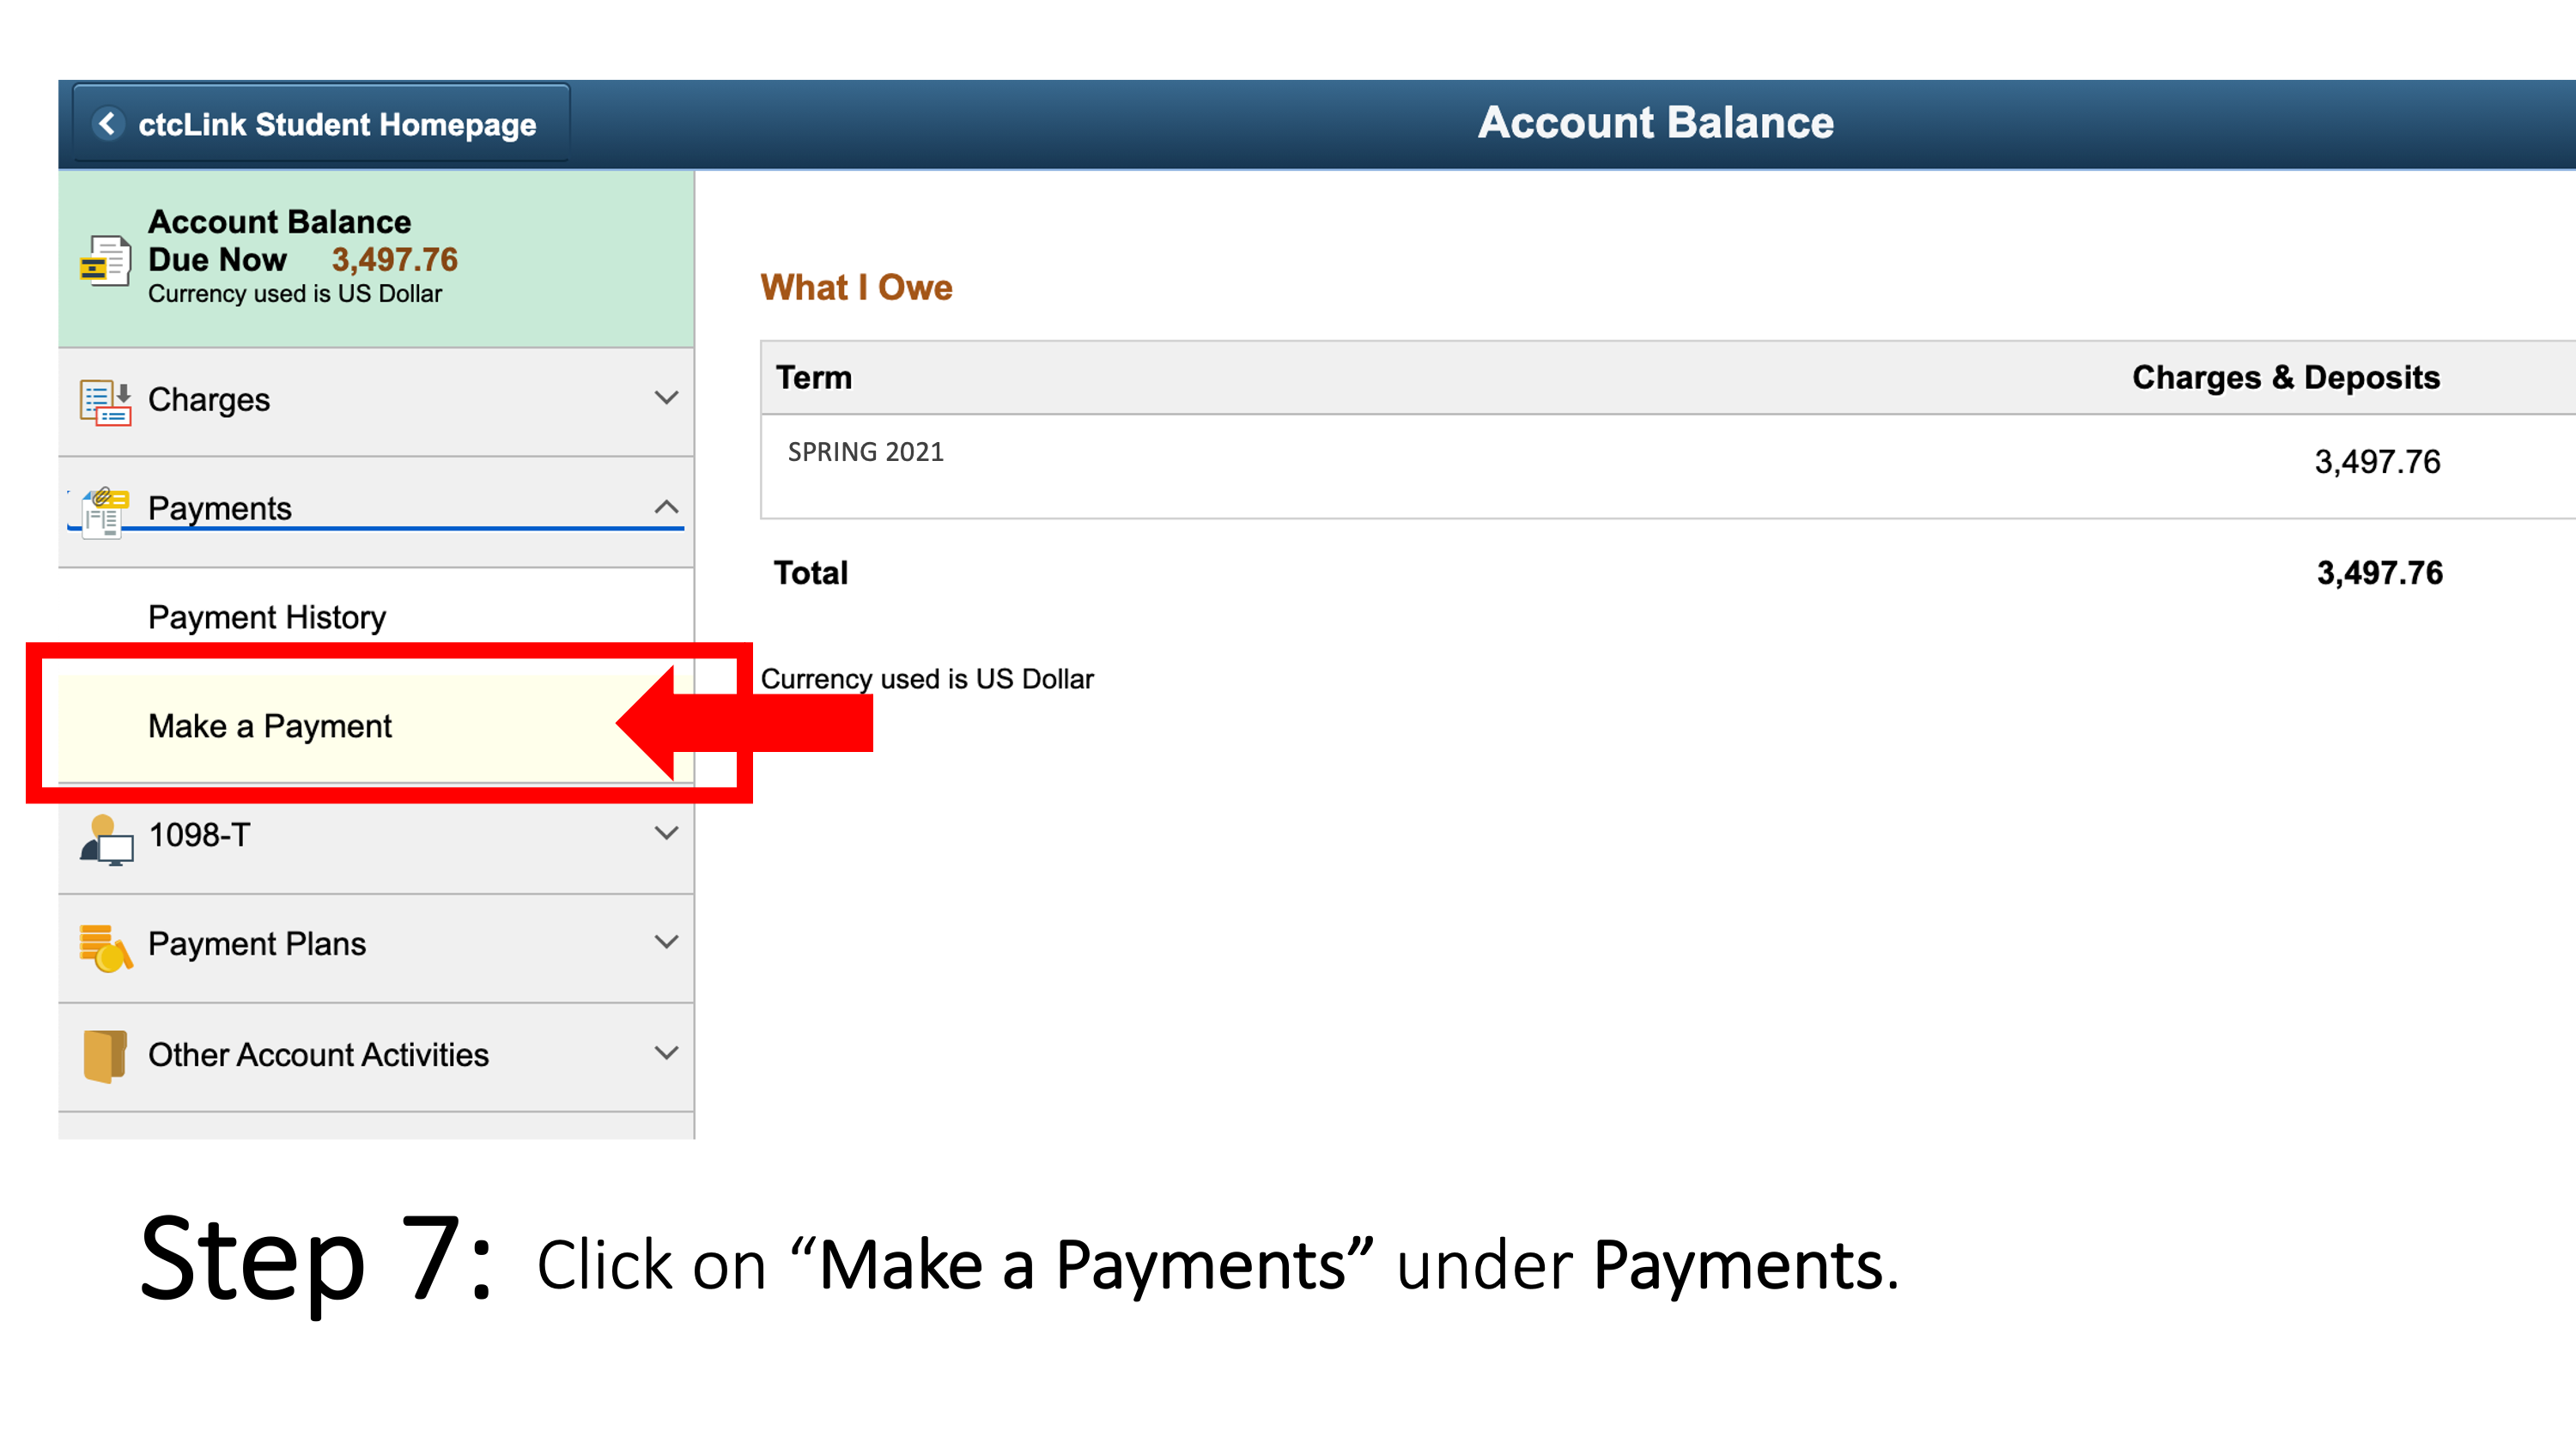  Click on “Make a Payments” under Payments.